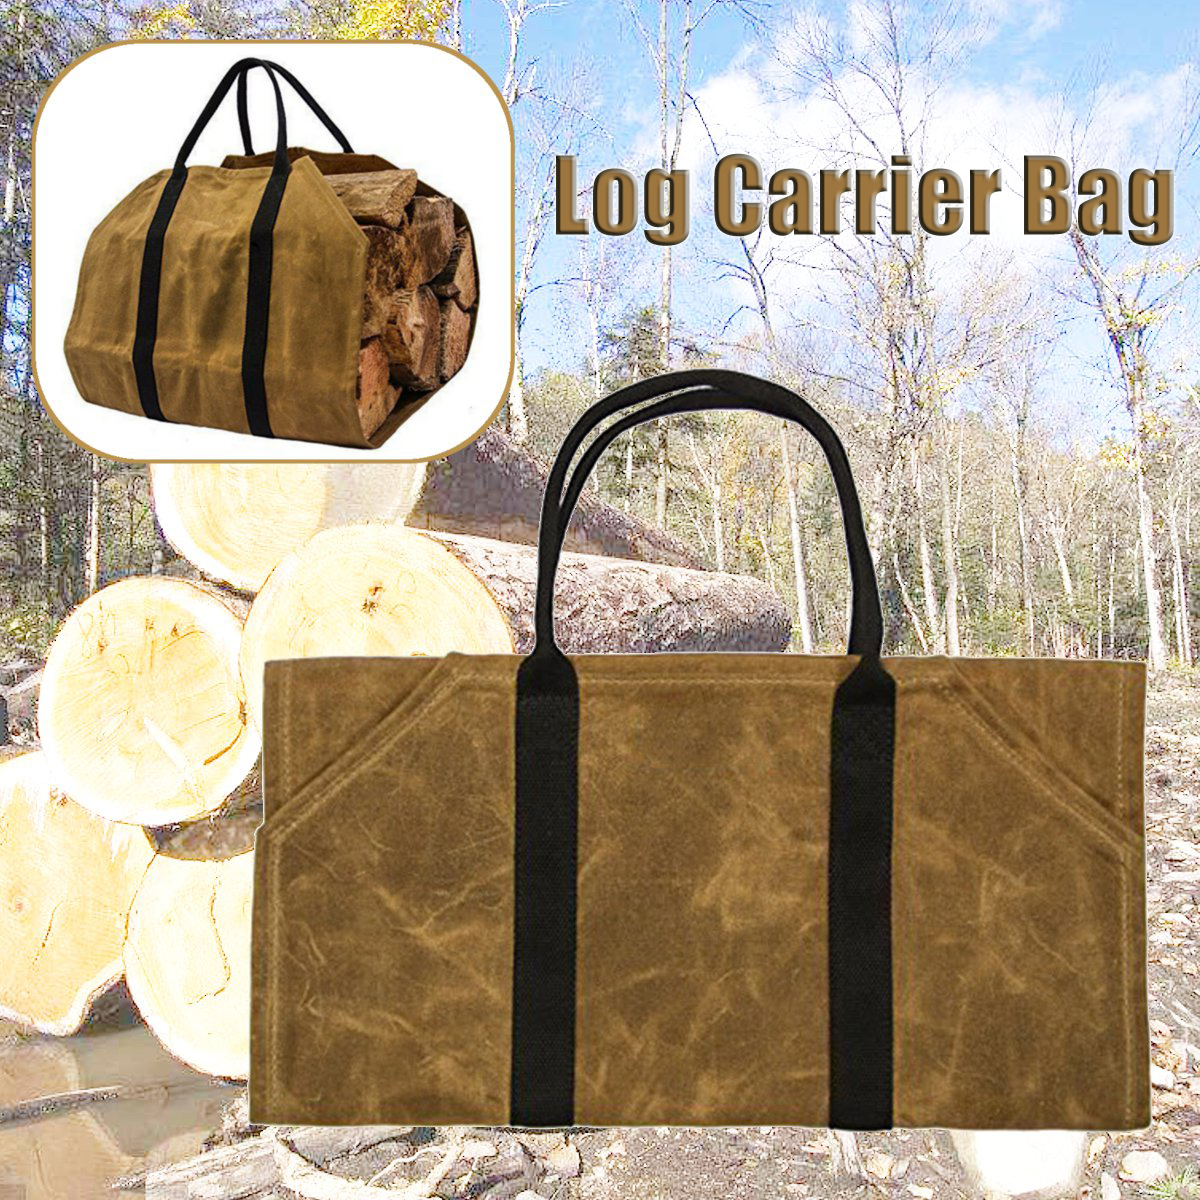 khaki-Firewood-Carrier-Log-Carrier-Wood-Carrying-Bag-for-Fireplace-16oz-Waxed-Canvas-1388831-2